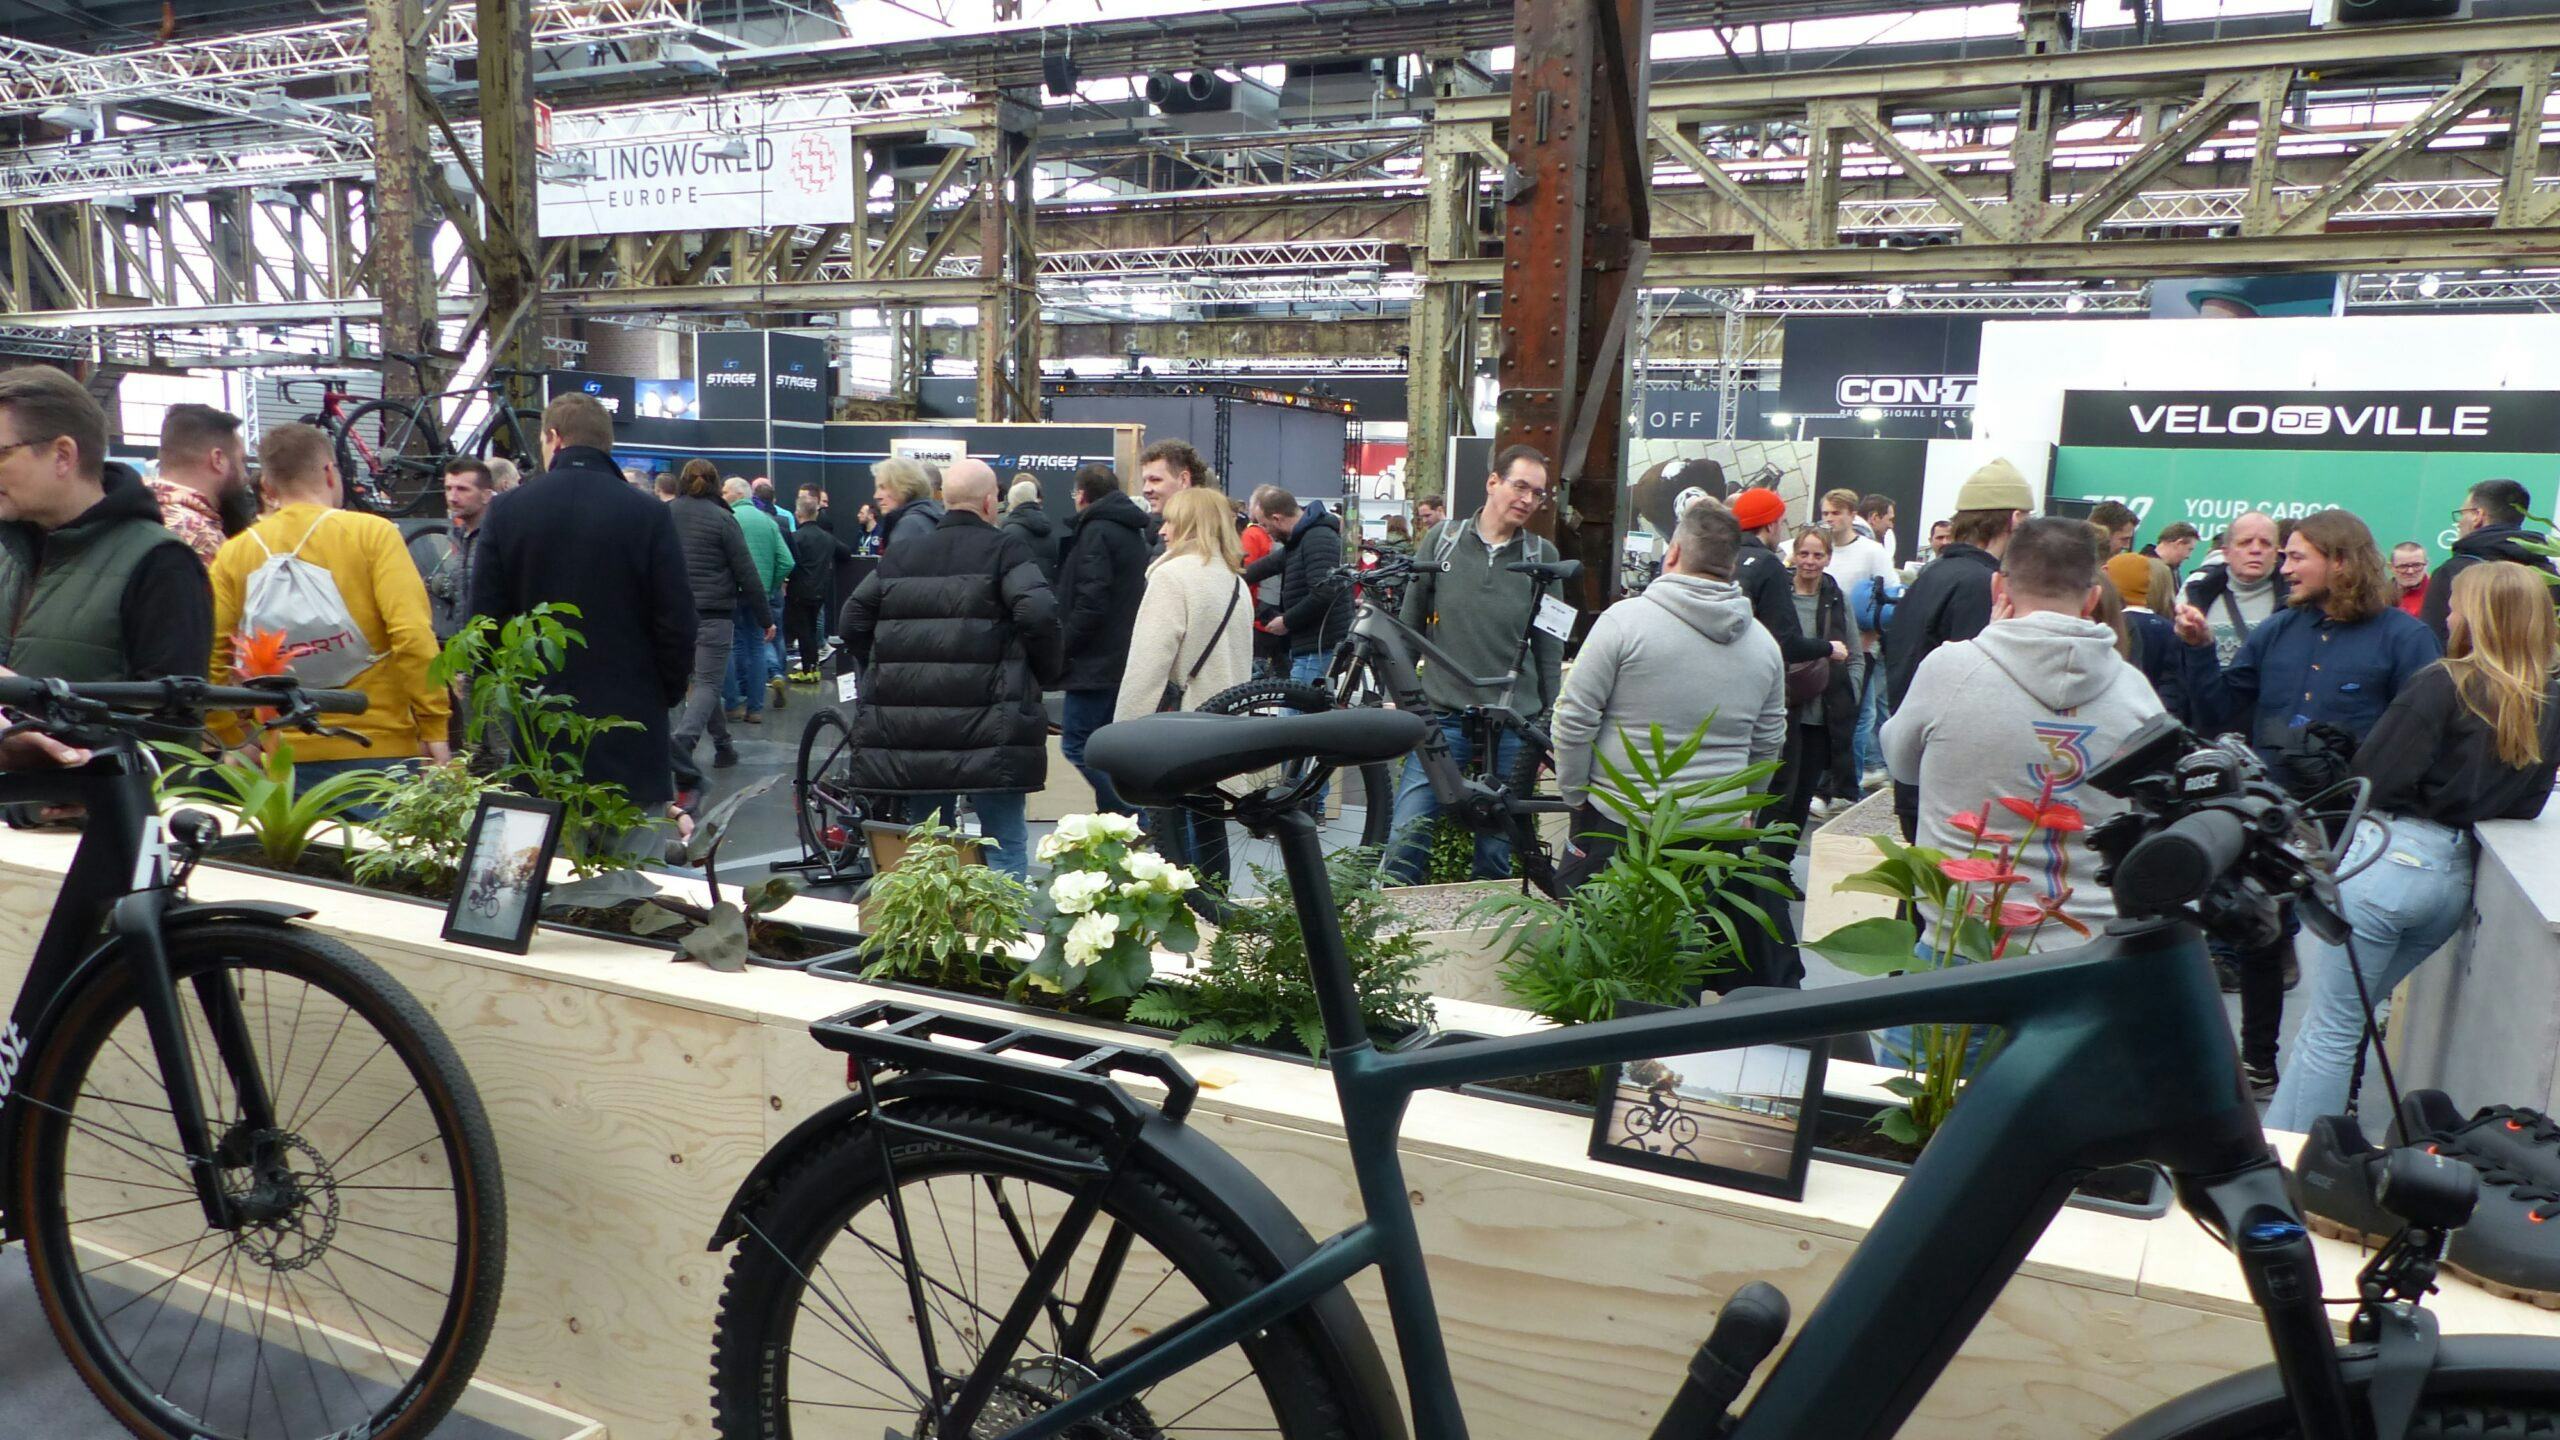 Cyclingworld provides a rather equal distribution of floor space between the exhibitors. – Photo Bike Europe